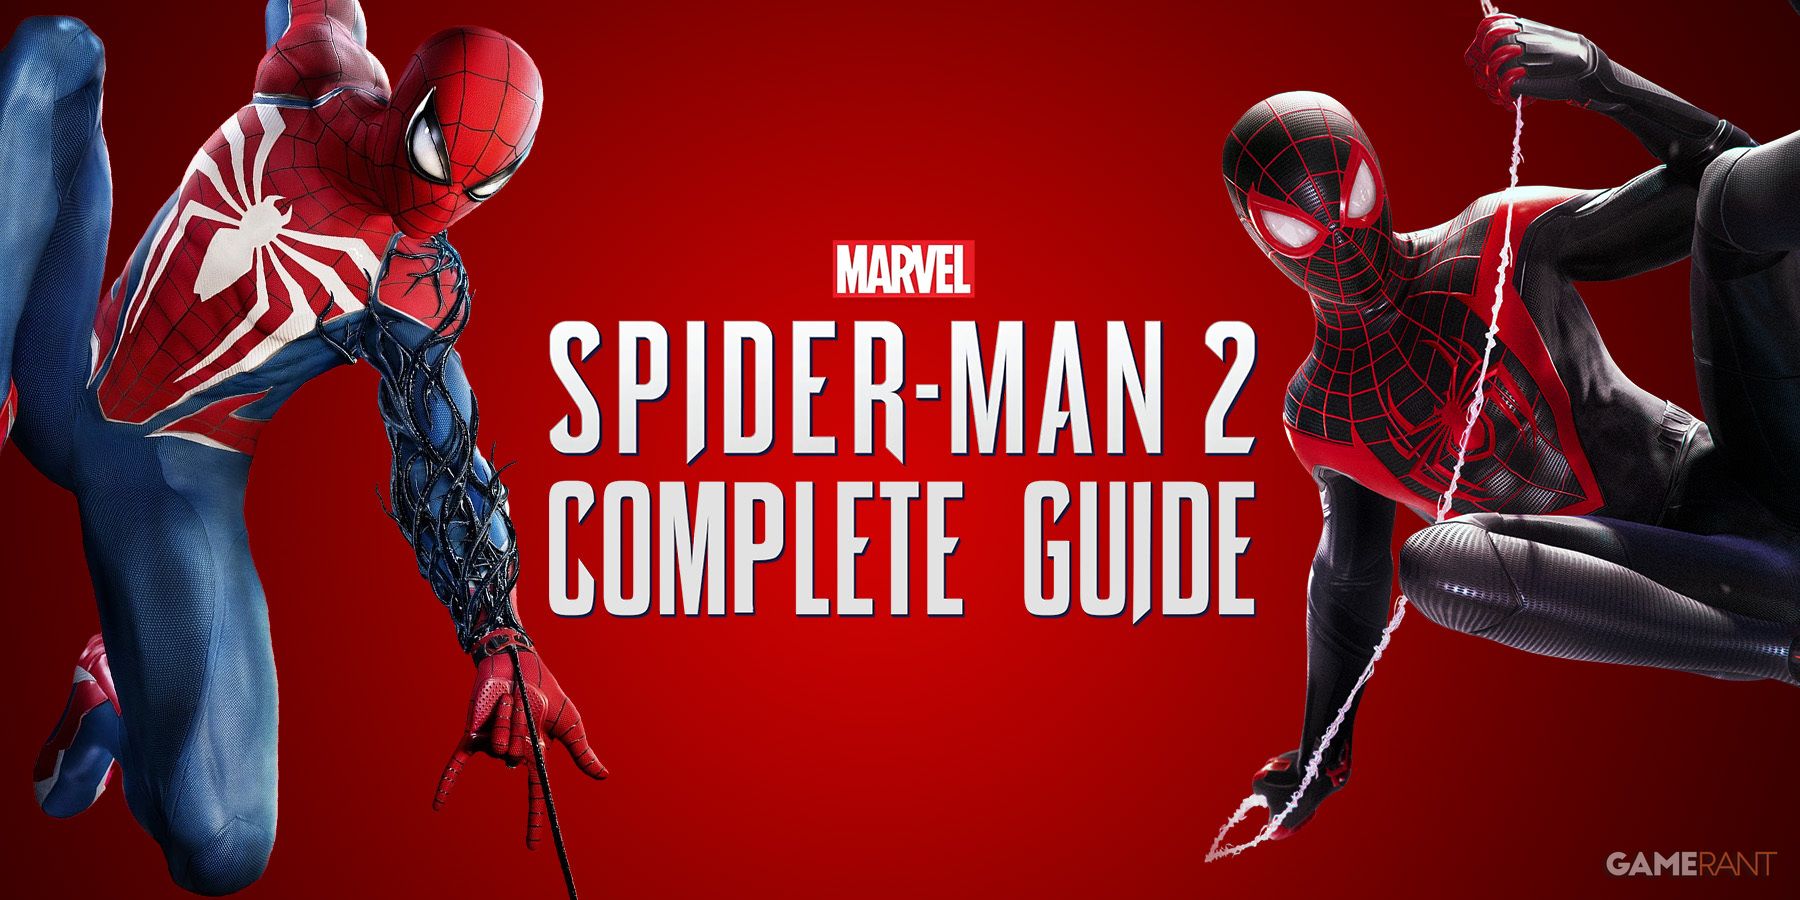 marvels-spider-man-2-complete-guide-gamerant-thumb